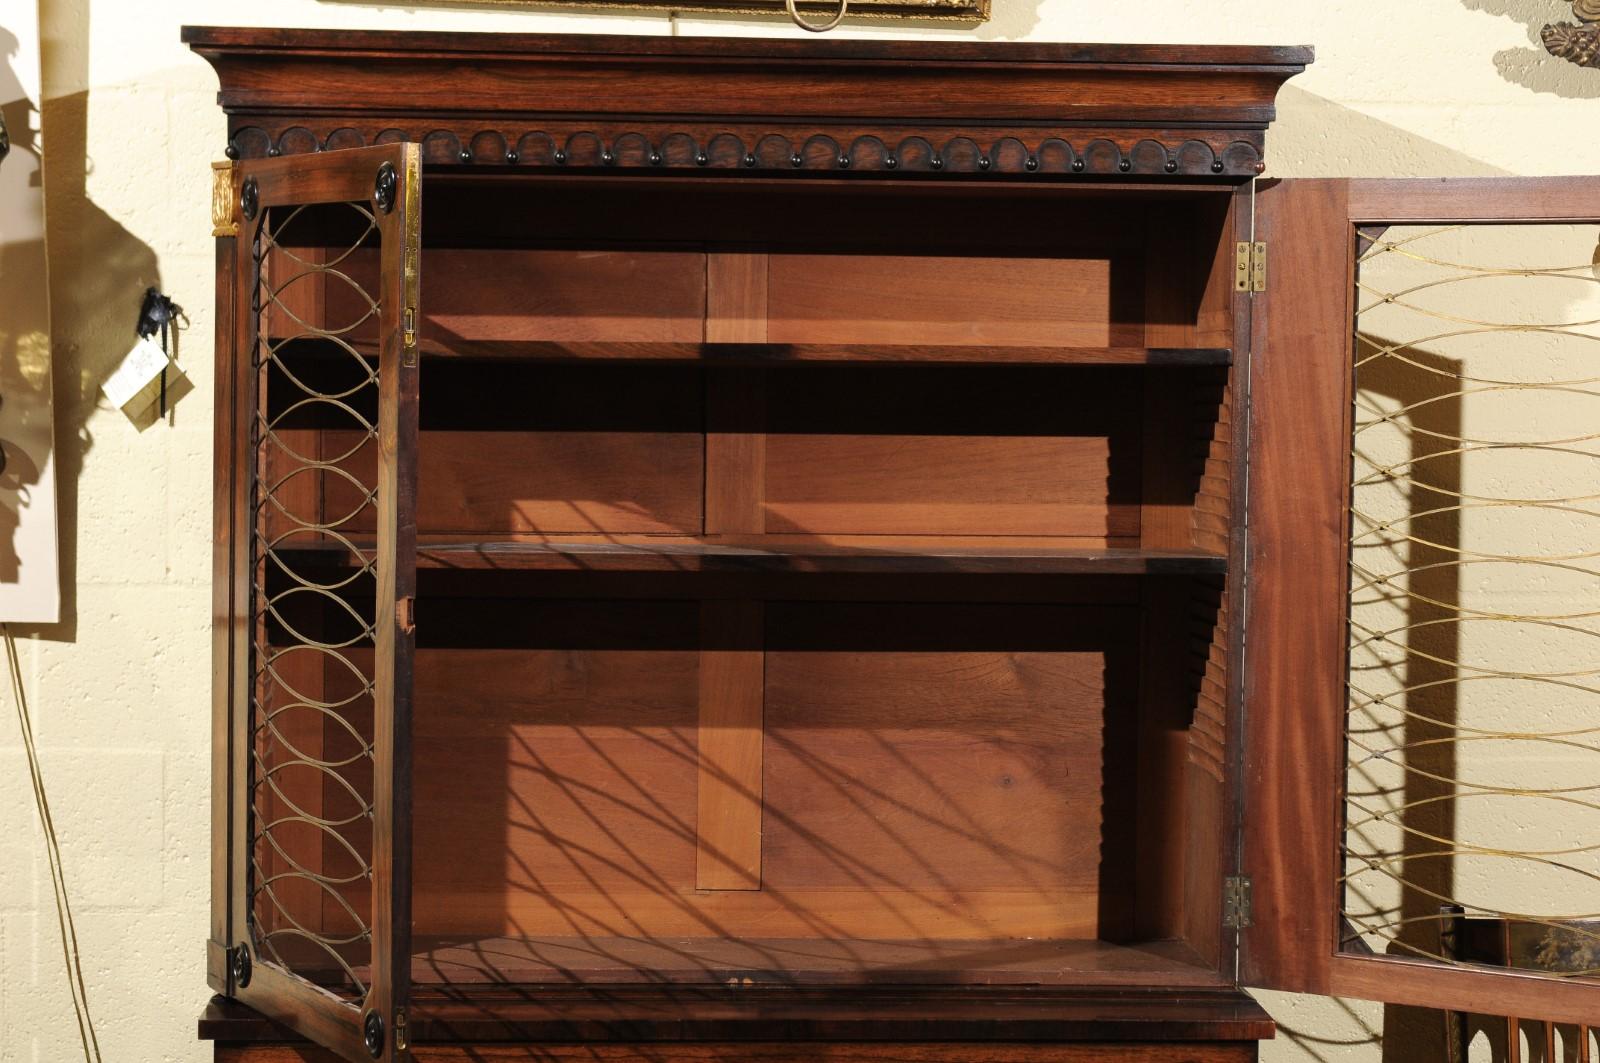 19th Century English Regency Style Rosewood Bookcase/Cabinet with Gilt Accents In Good Condition For Sale In Atlanta, GA